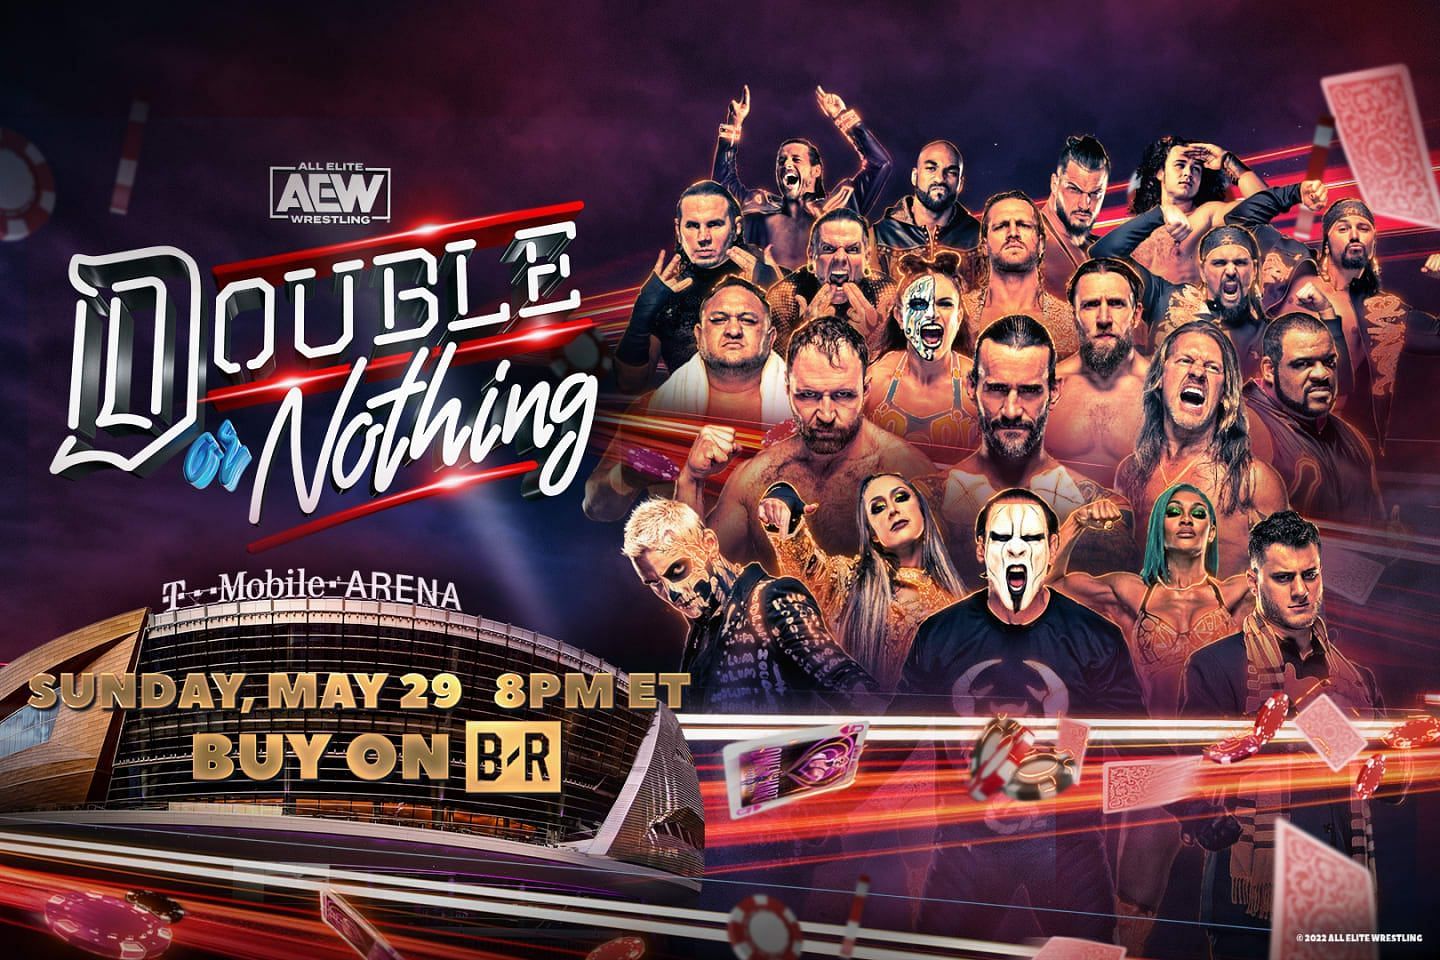 The Double or Nothing match card seems unbelievably stacked